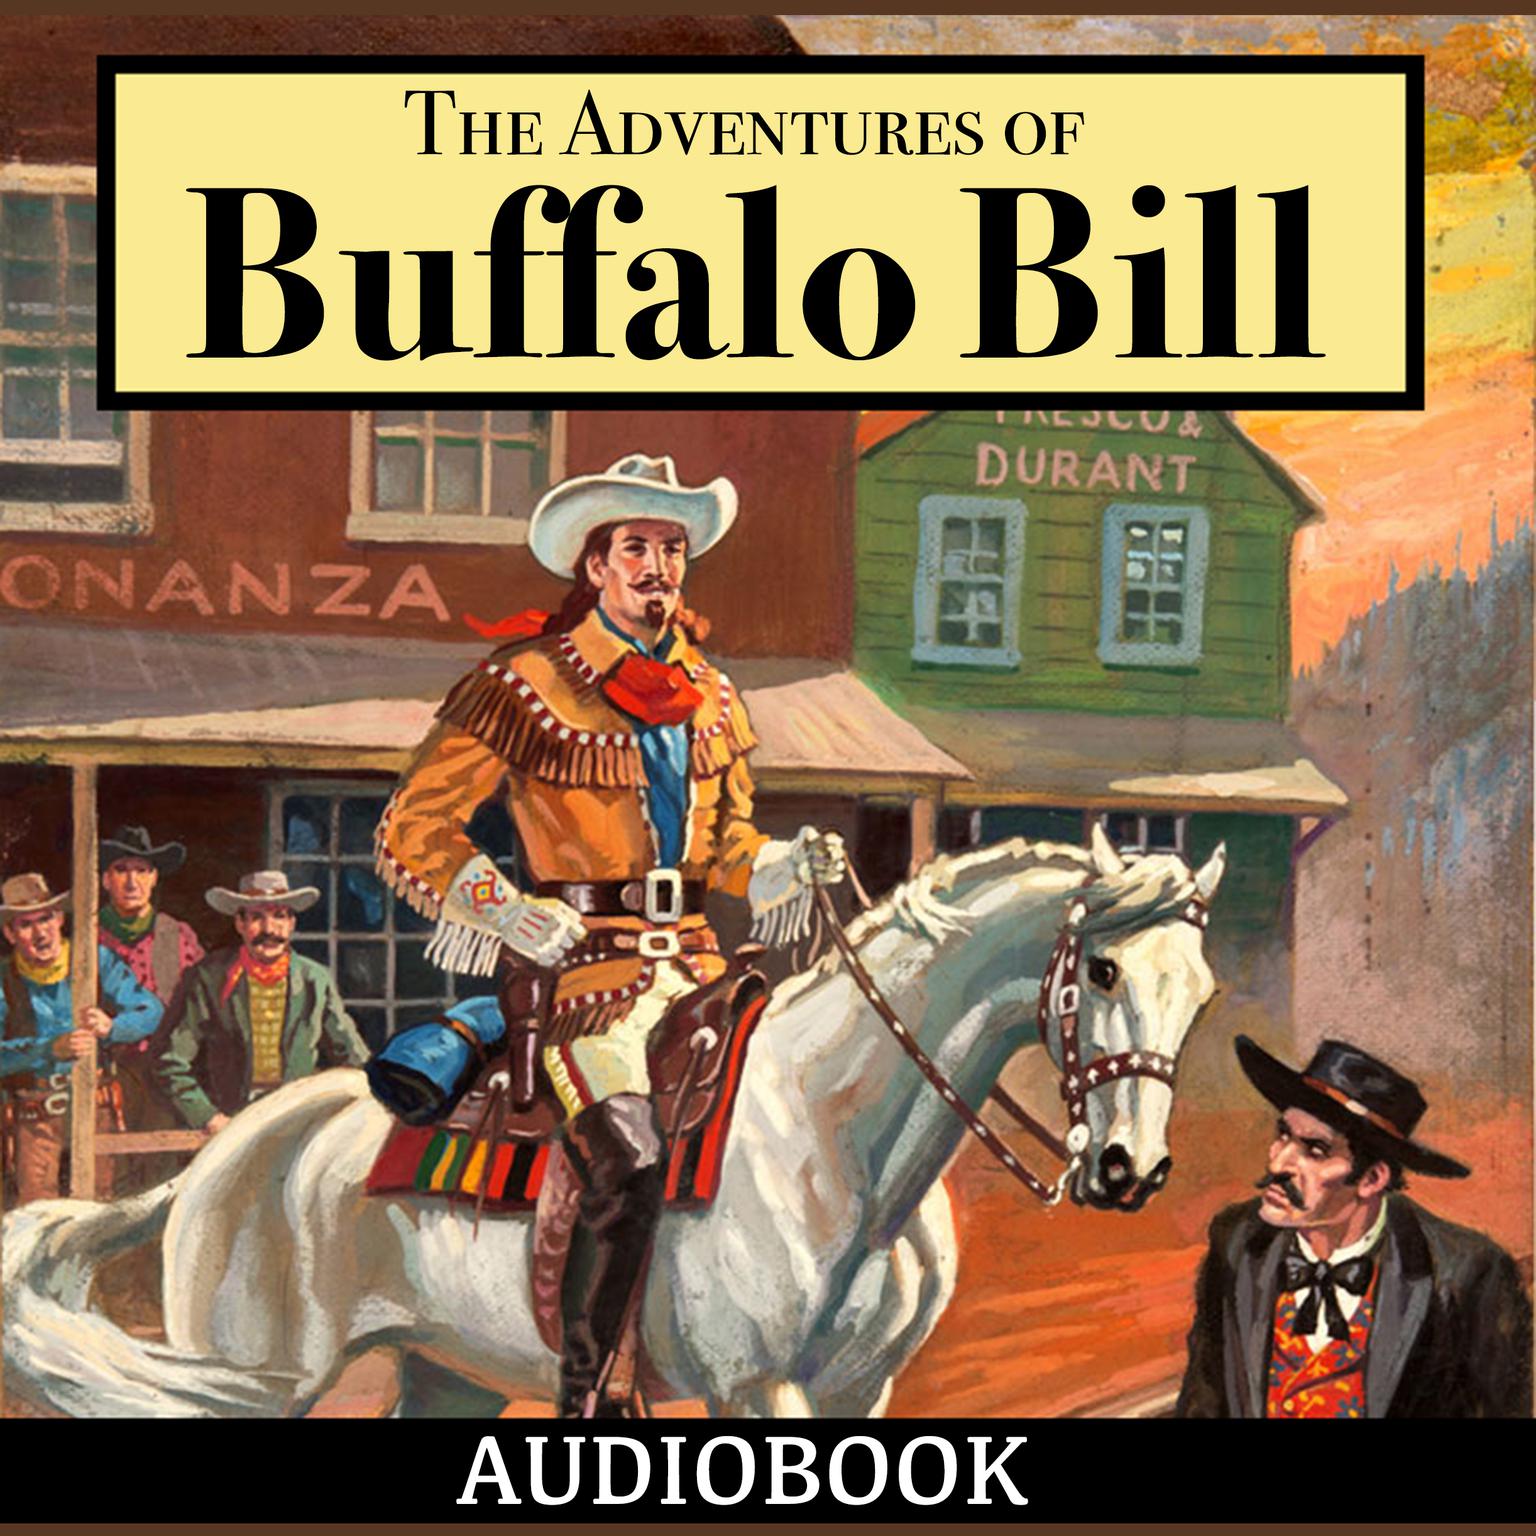 The Adventures of Buffalo Bill Audiobook, by Col. William F. Cody